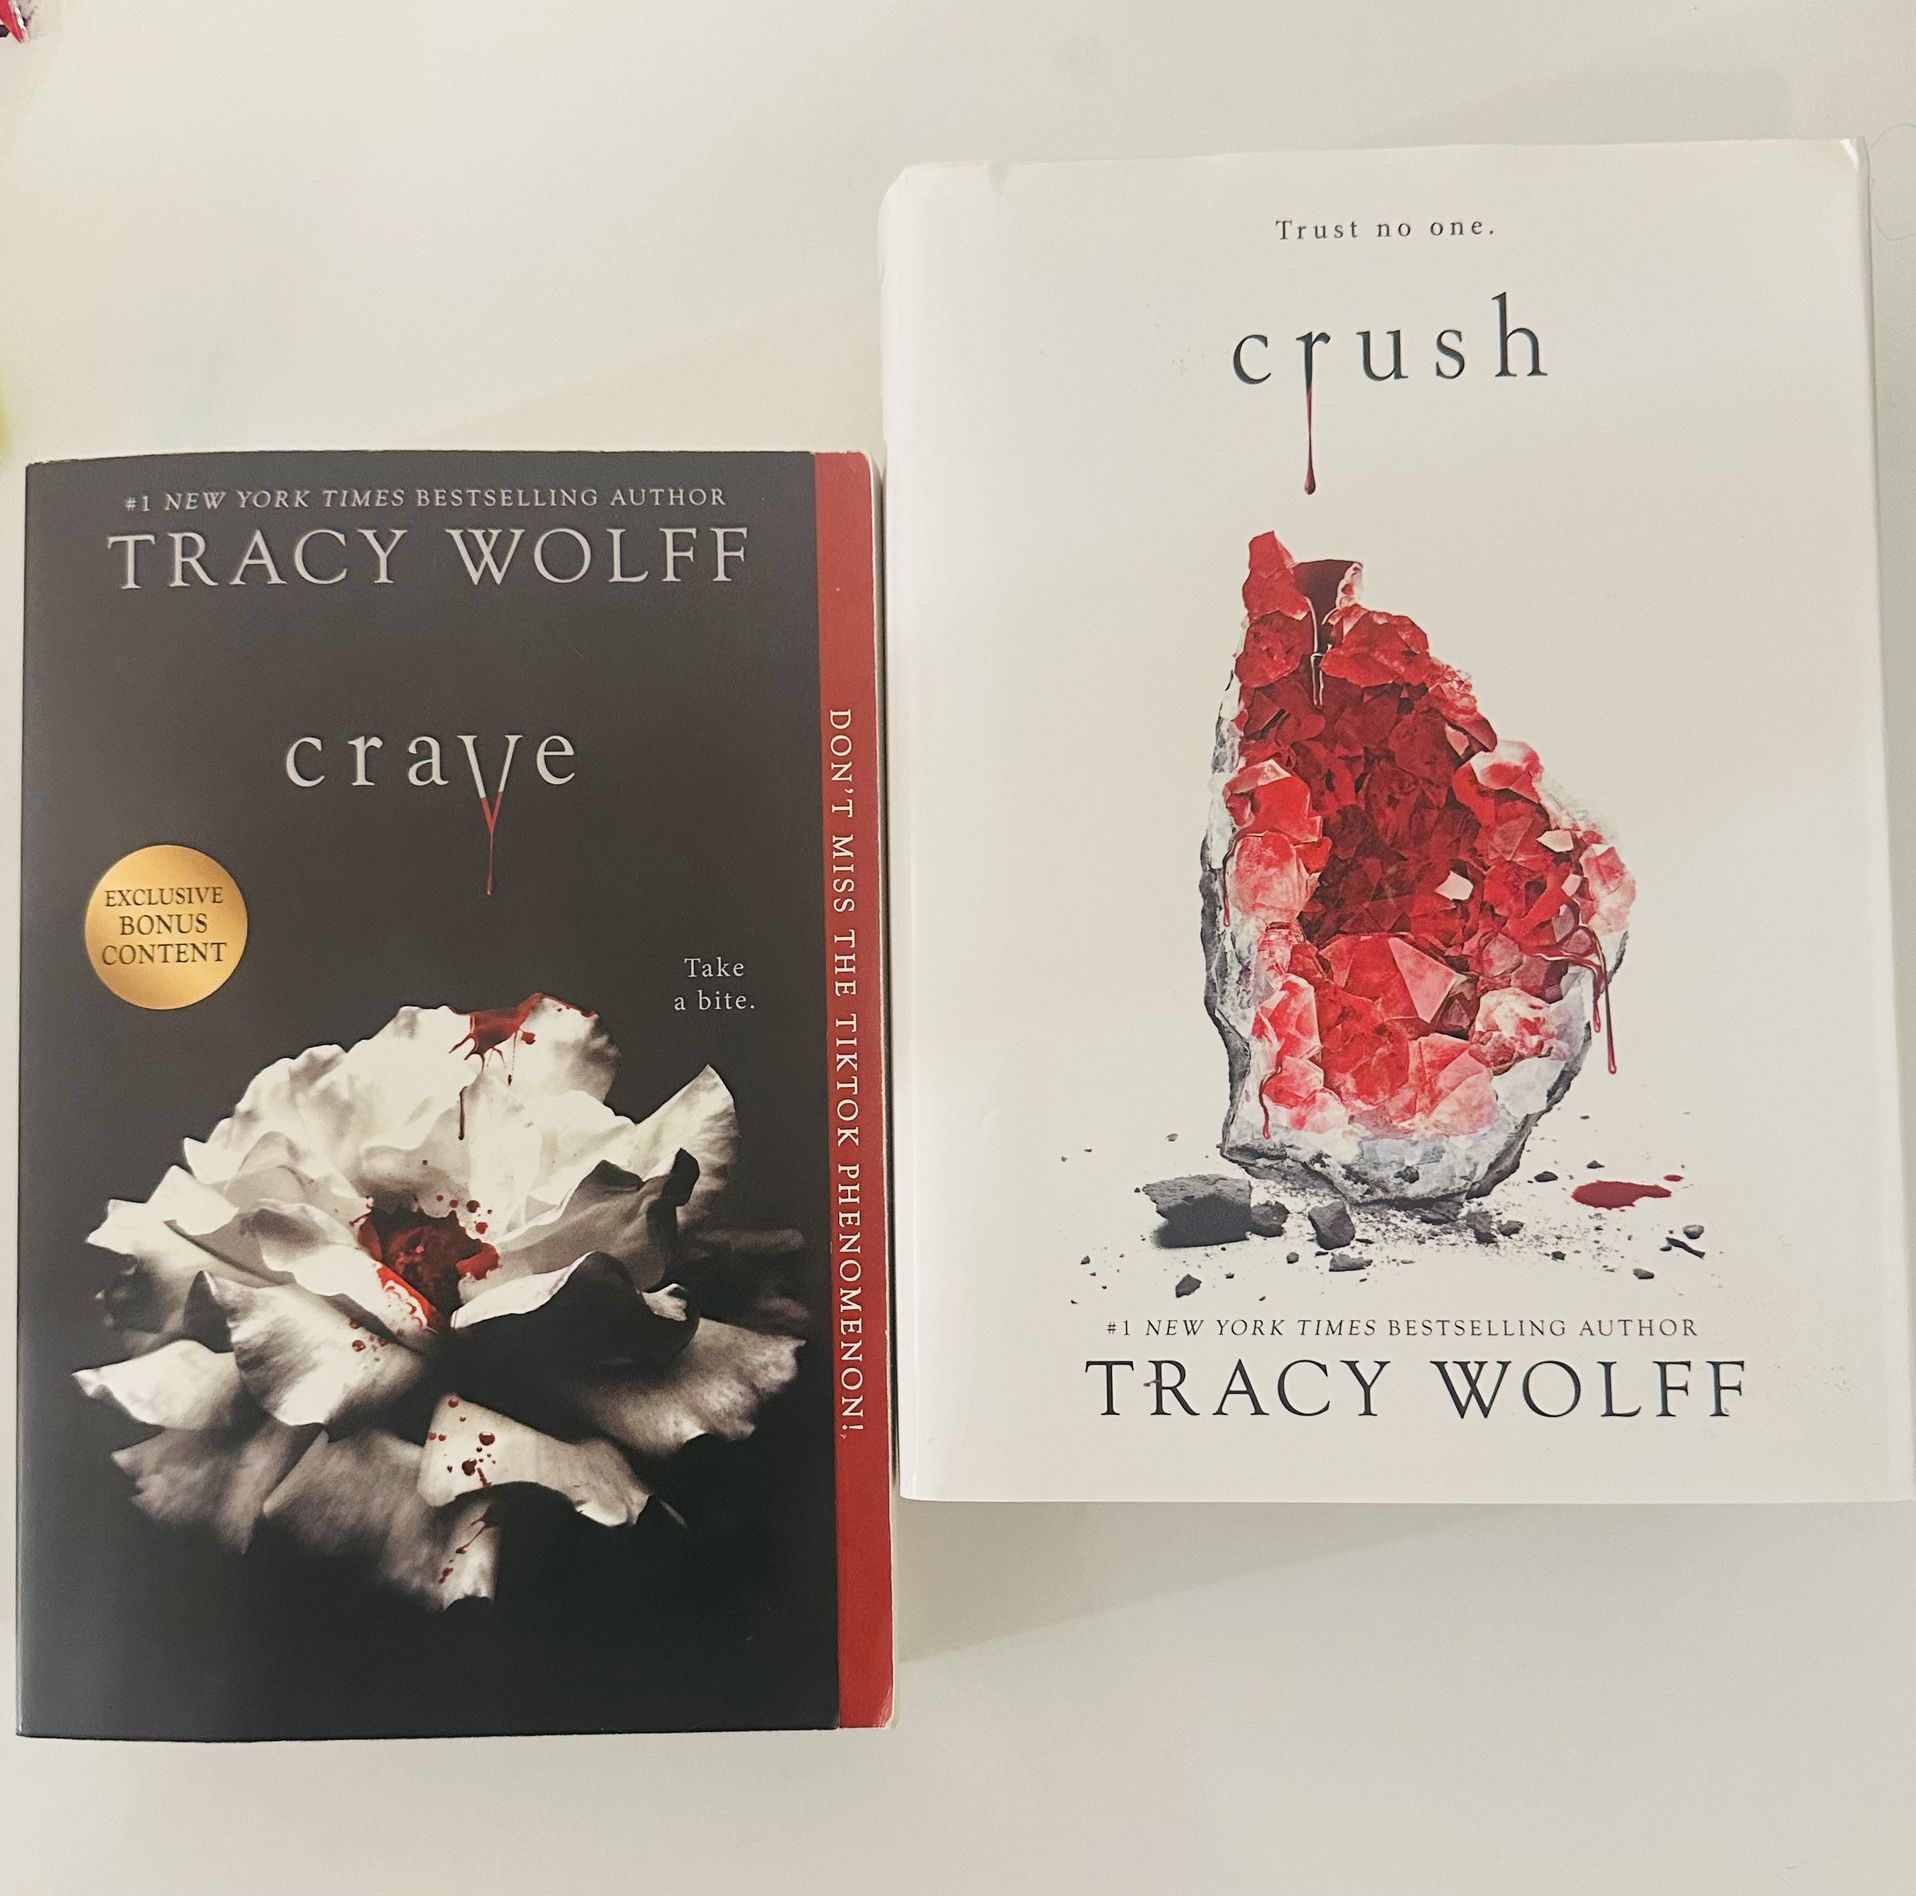 BOOK: CRUSH & CRAVE by Tracy Wolff